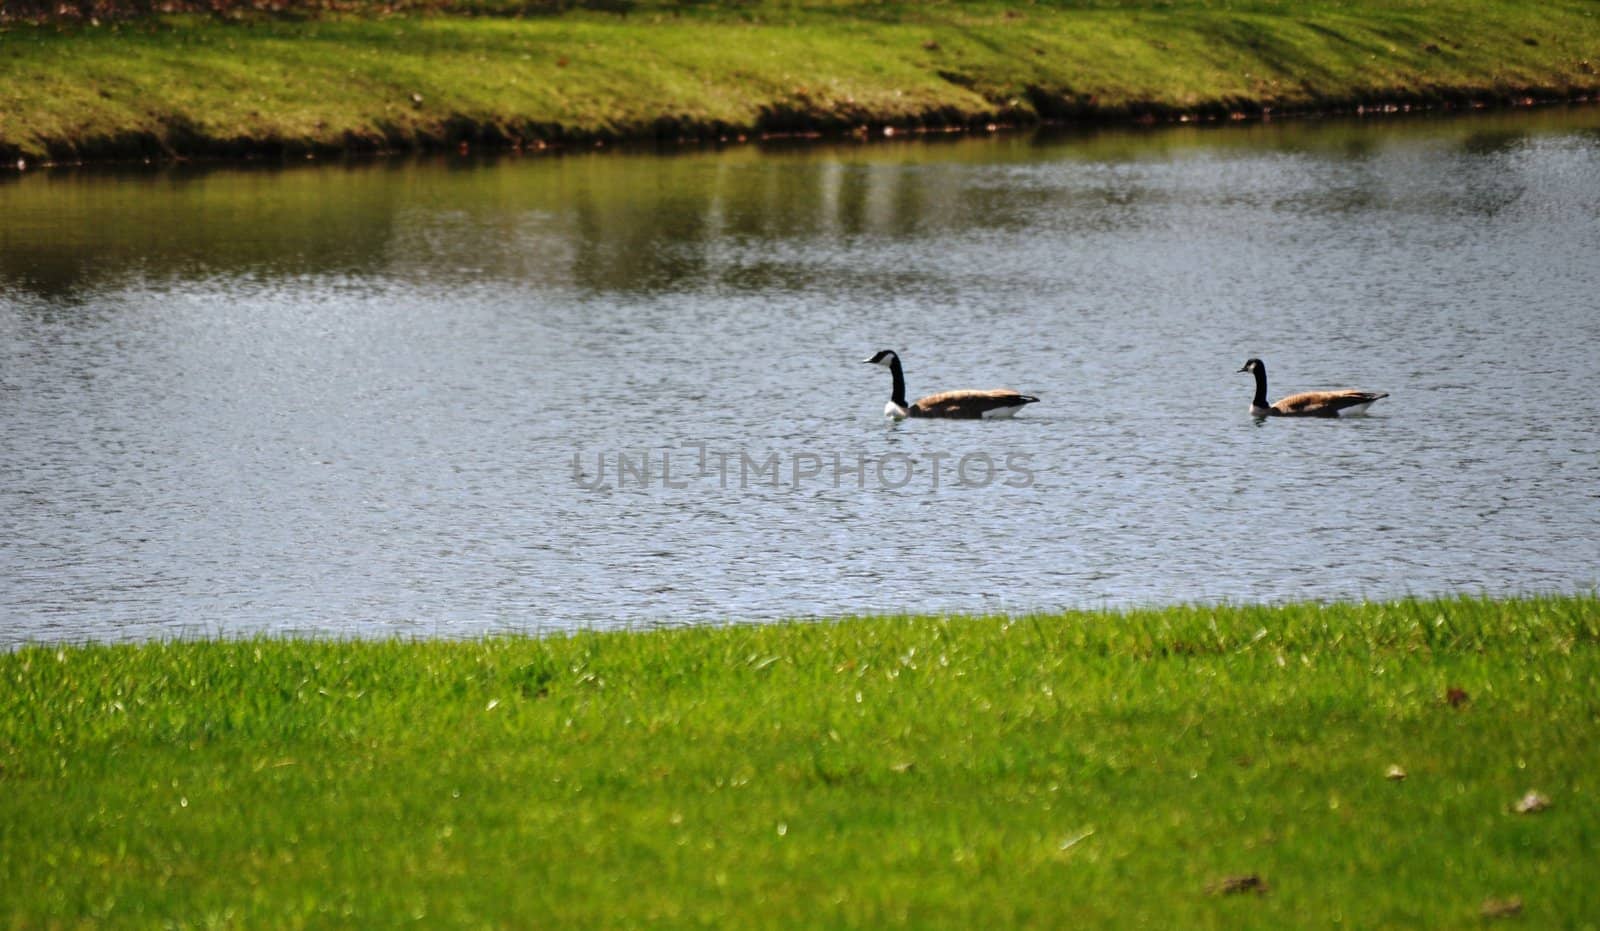 Ducks swimming on the right by RefocusPhoto